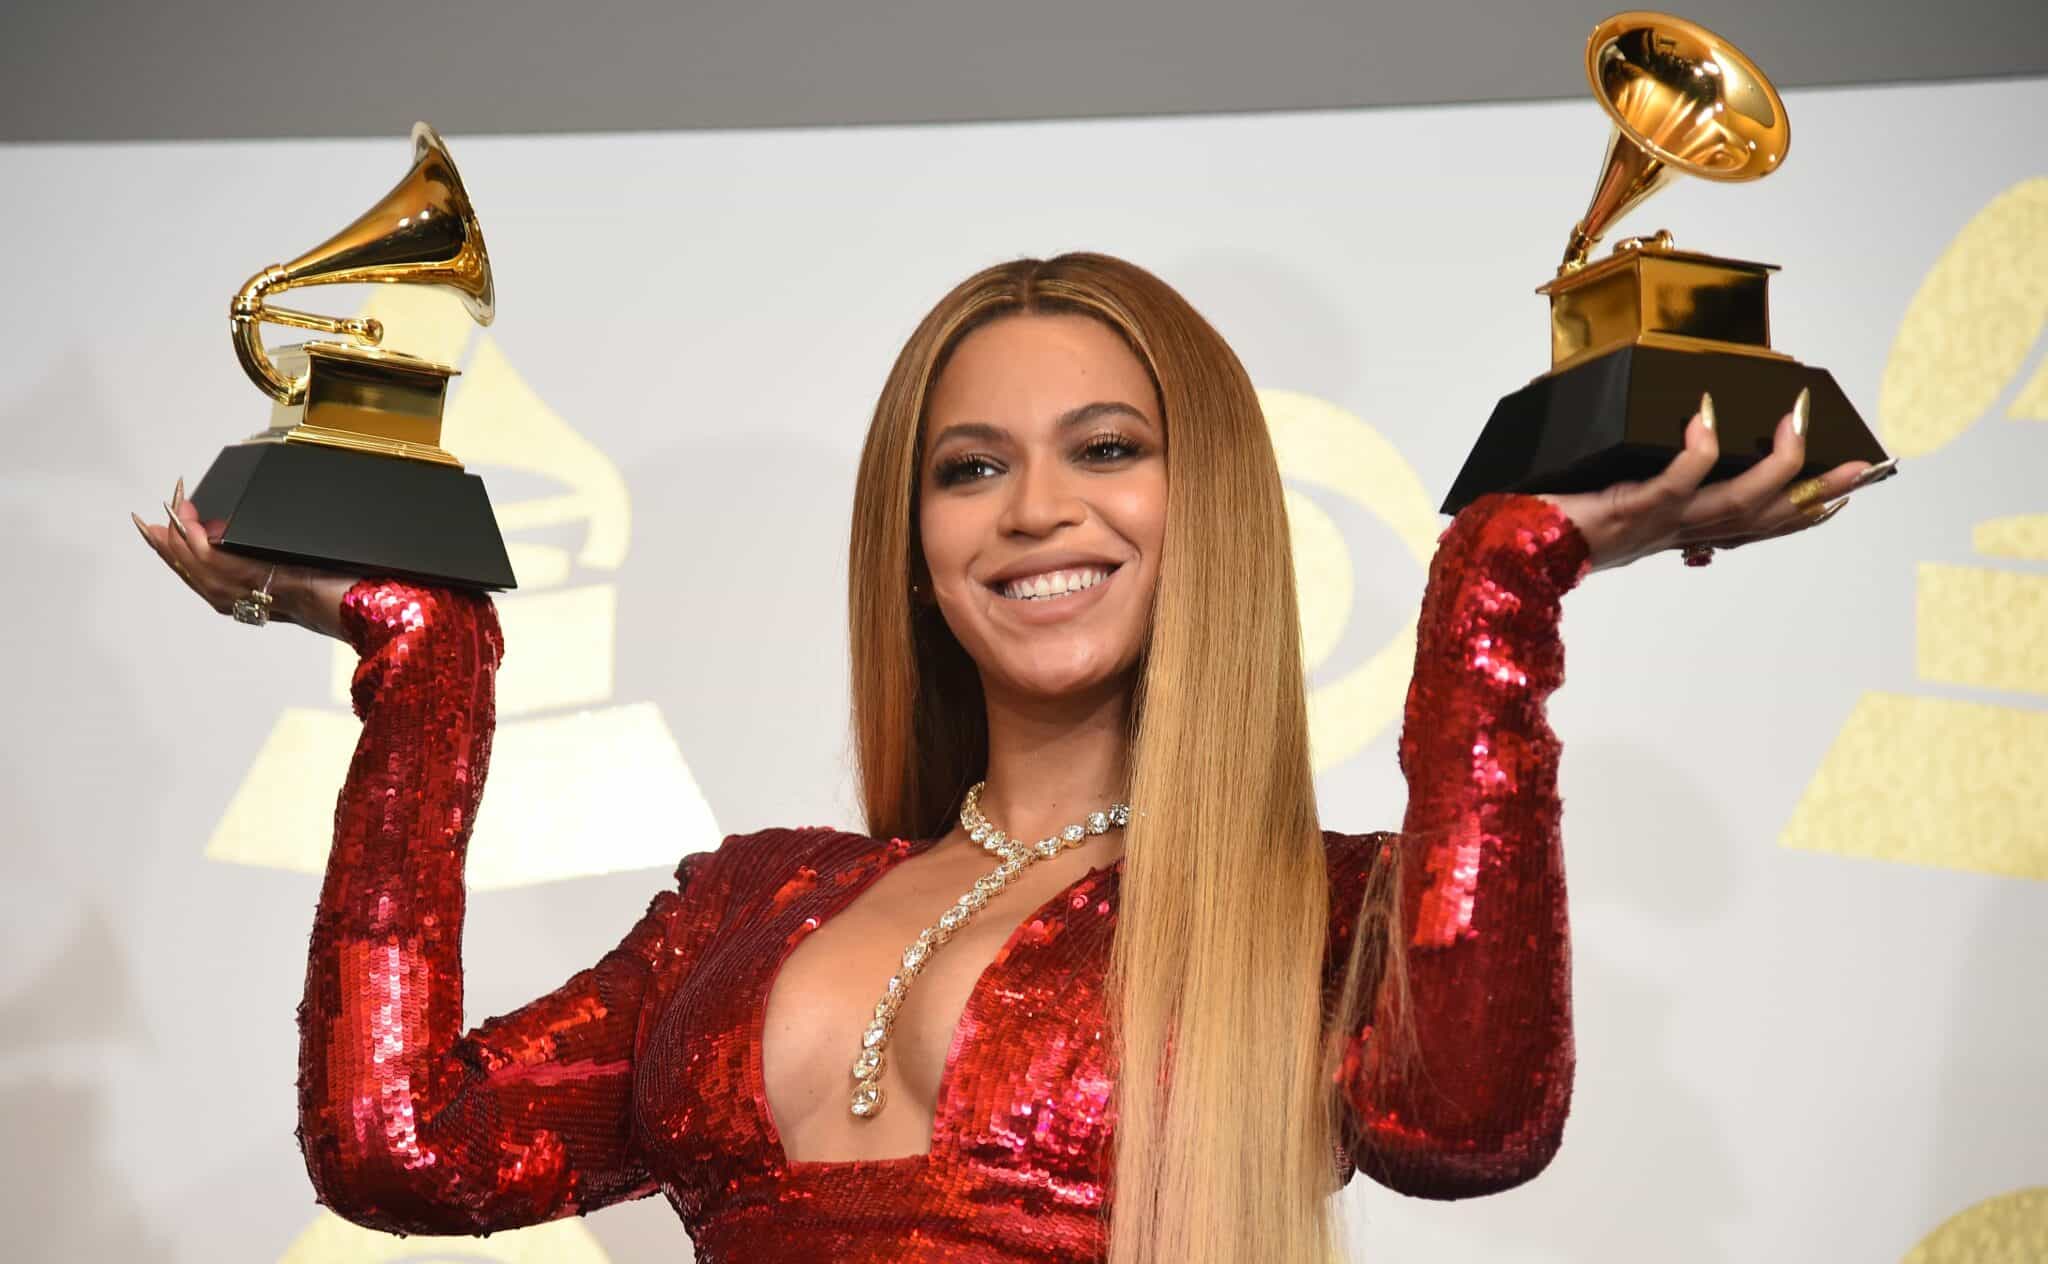 Singer Beyonce poses with her Grammy trophies in the press room during the 59th Annual Grammy music Awards on February 12, 2017, in Los Angeles, California.  / AFP / Robyn BECK        (Photo credit should read ROBYN BECK/AFP via Getty Images)